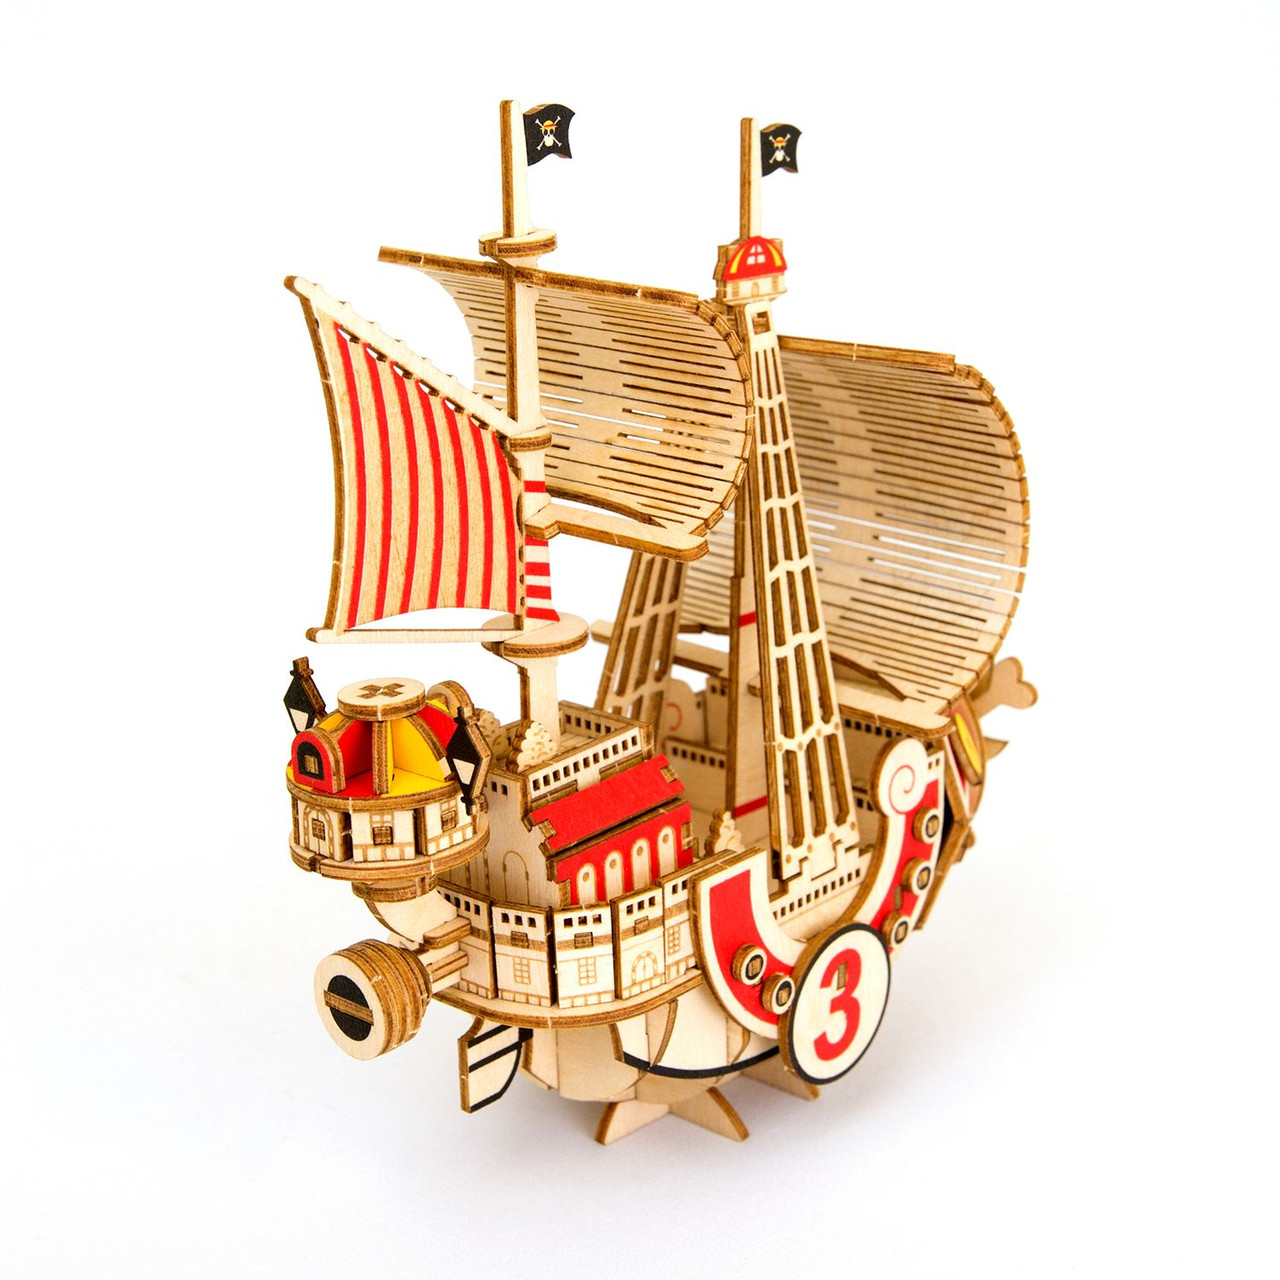 Azone Wooden Art Style Wood Puzzle Kigumi ONE PIECE Thousand Sunny from JAPAN 